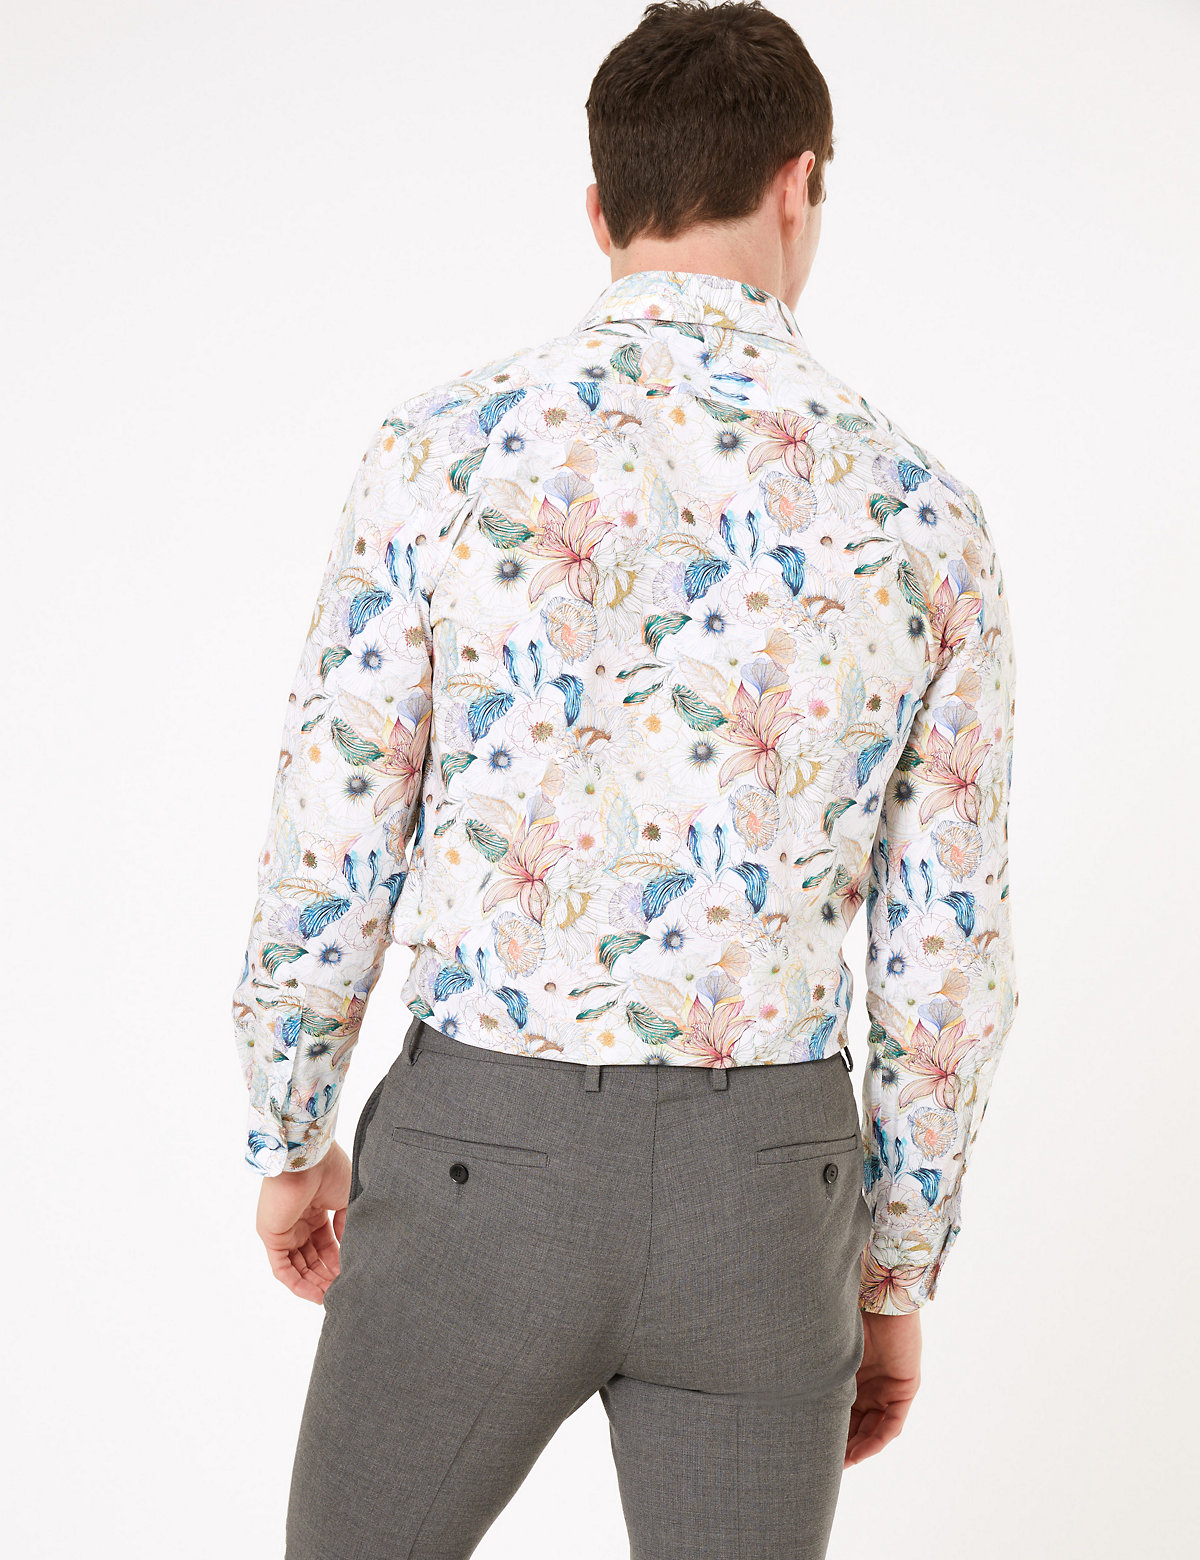 Tailored Fit Pure Cotton Printed Shirt